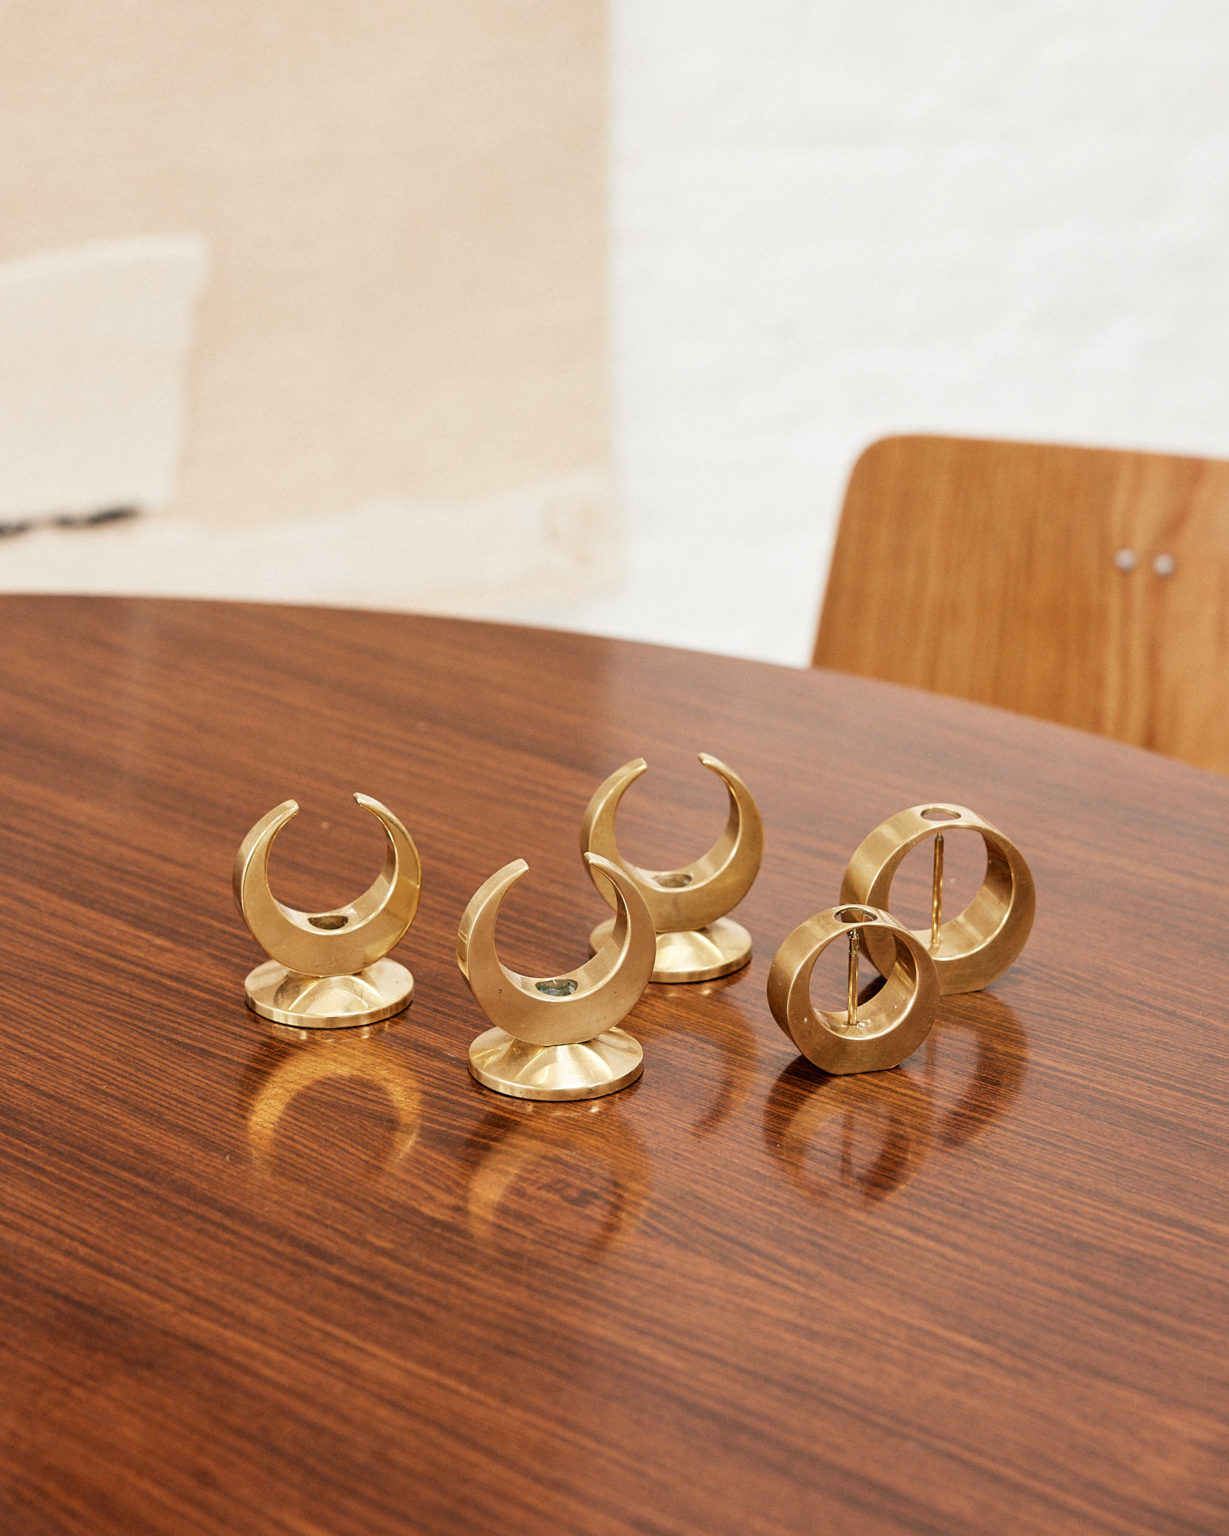 "Agarico" Round Table by Beppe vida